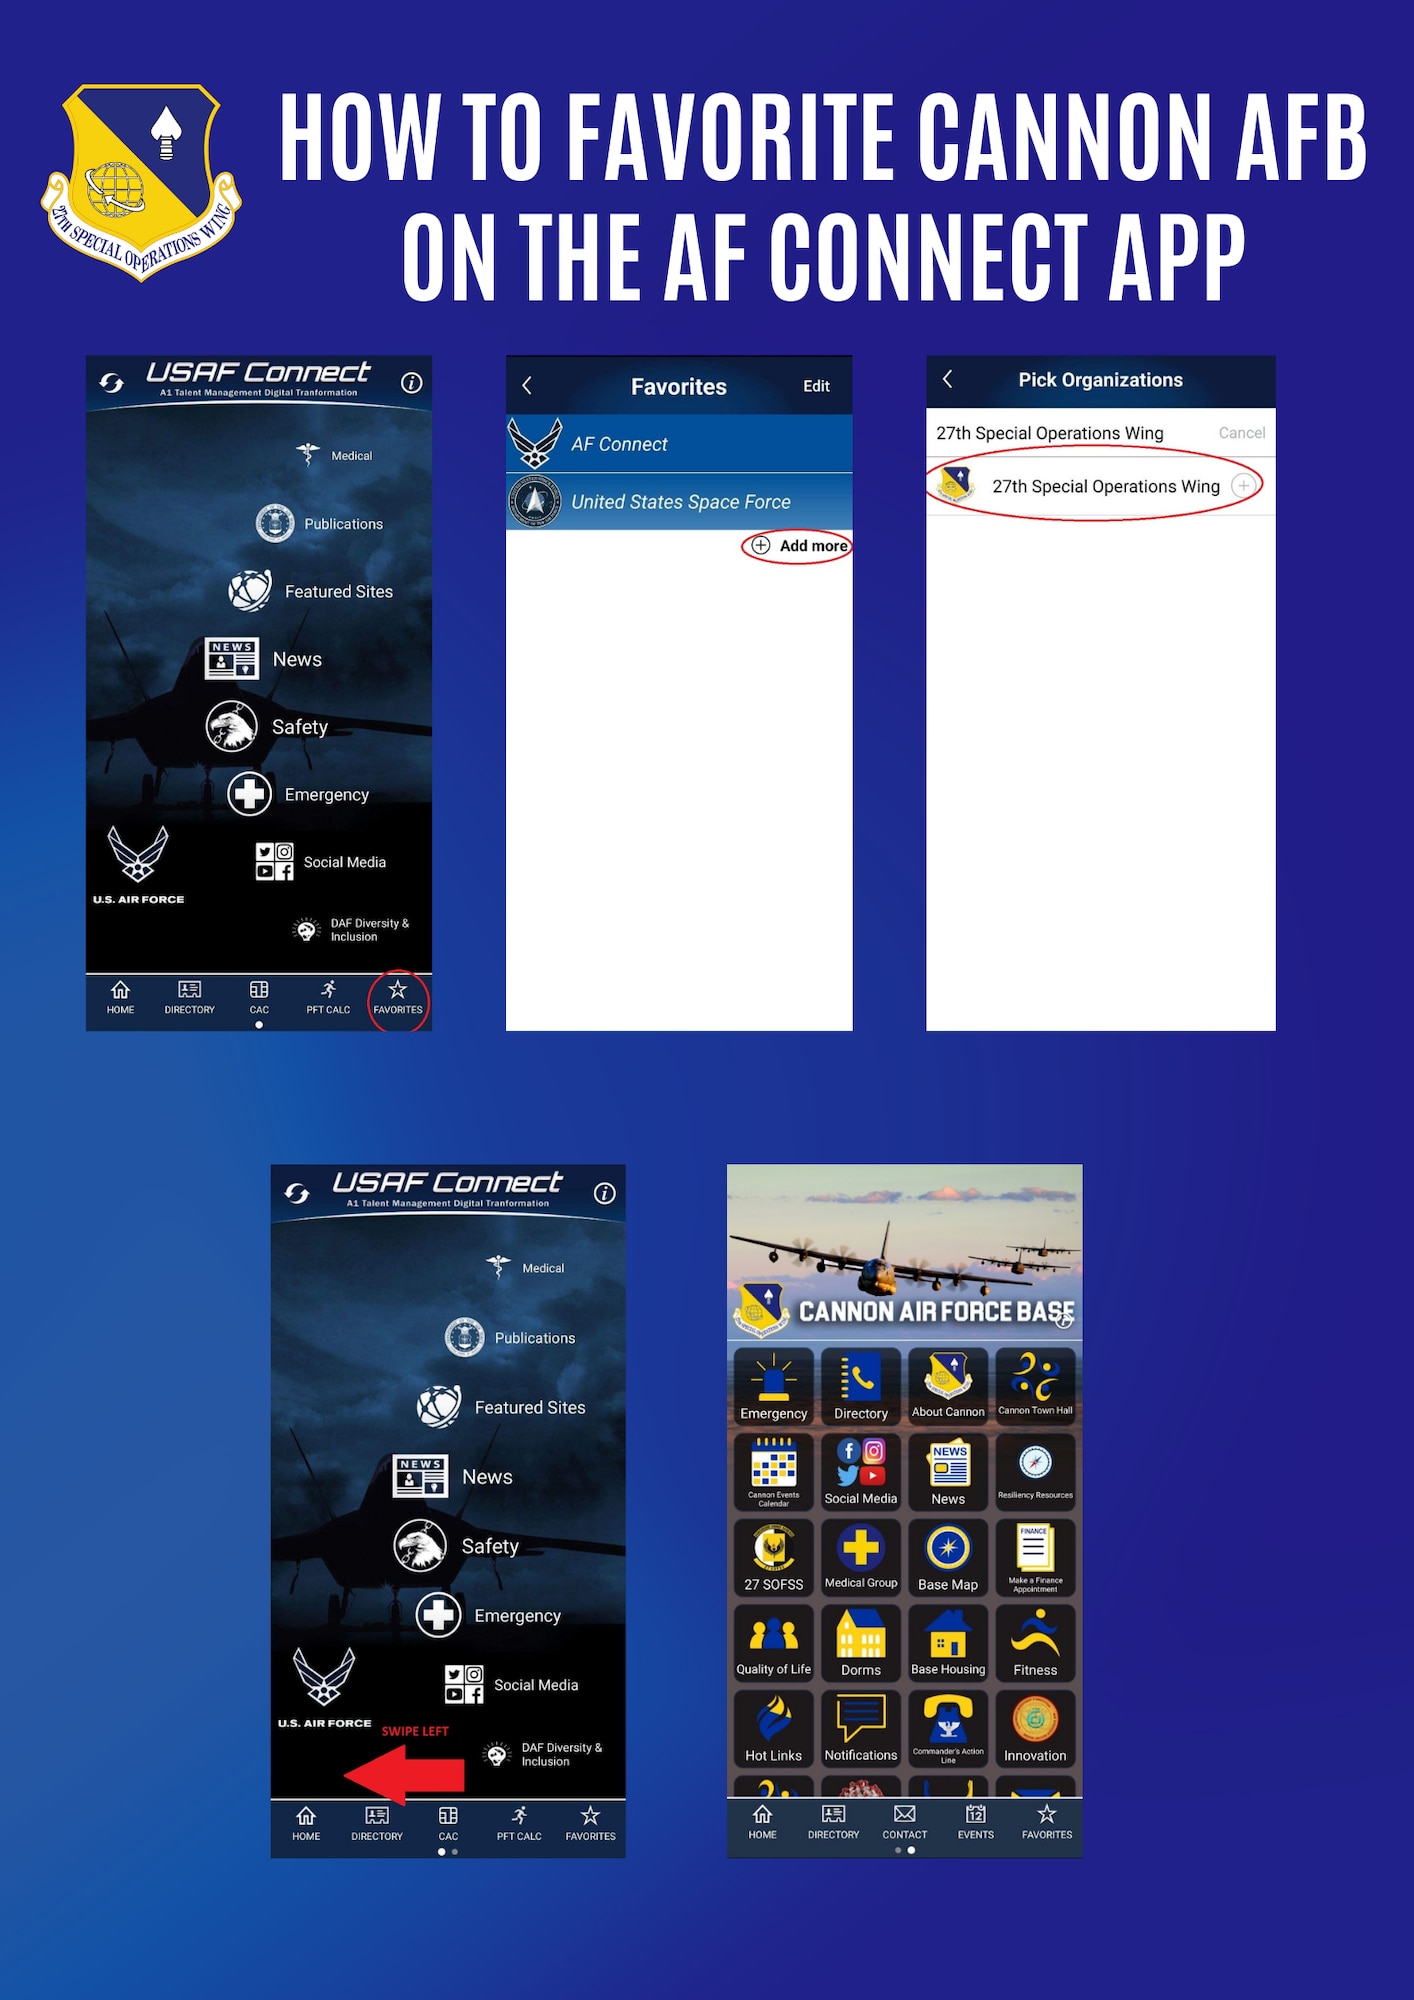 Follow the directions on the graphic to add the 27th Special Operations Wing as a favorite on the AF Connect App.